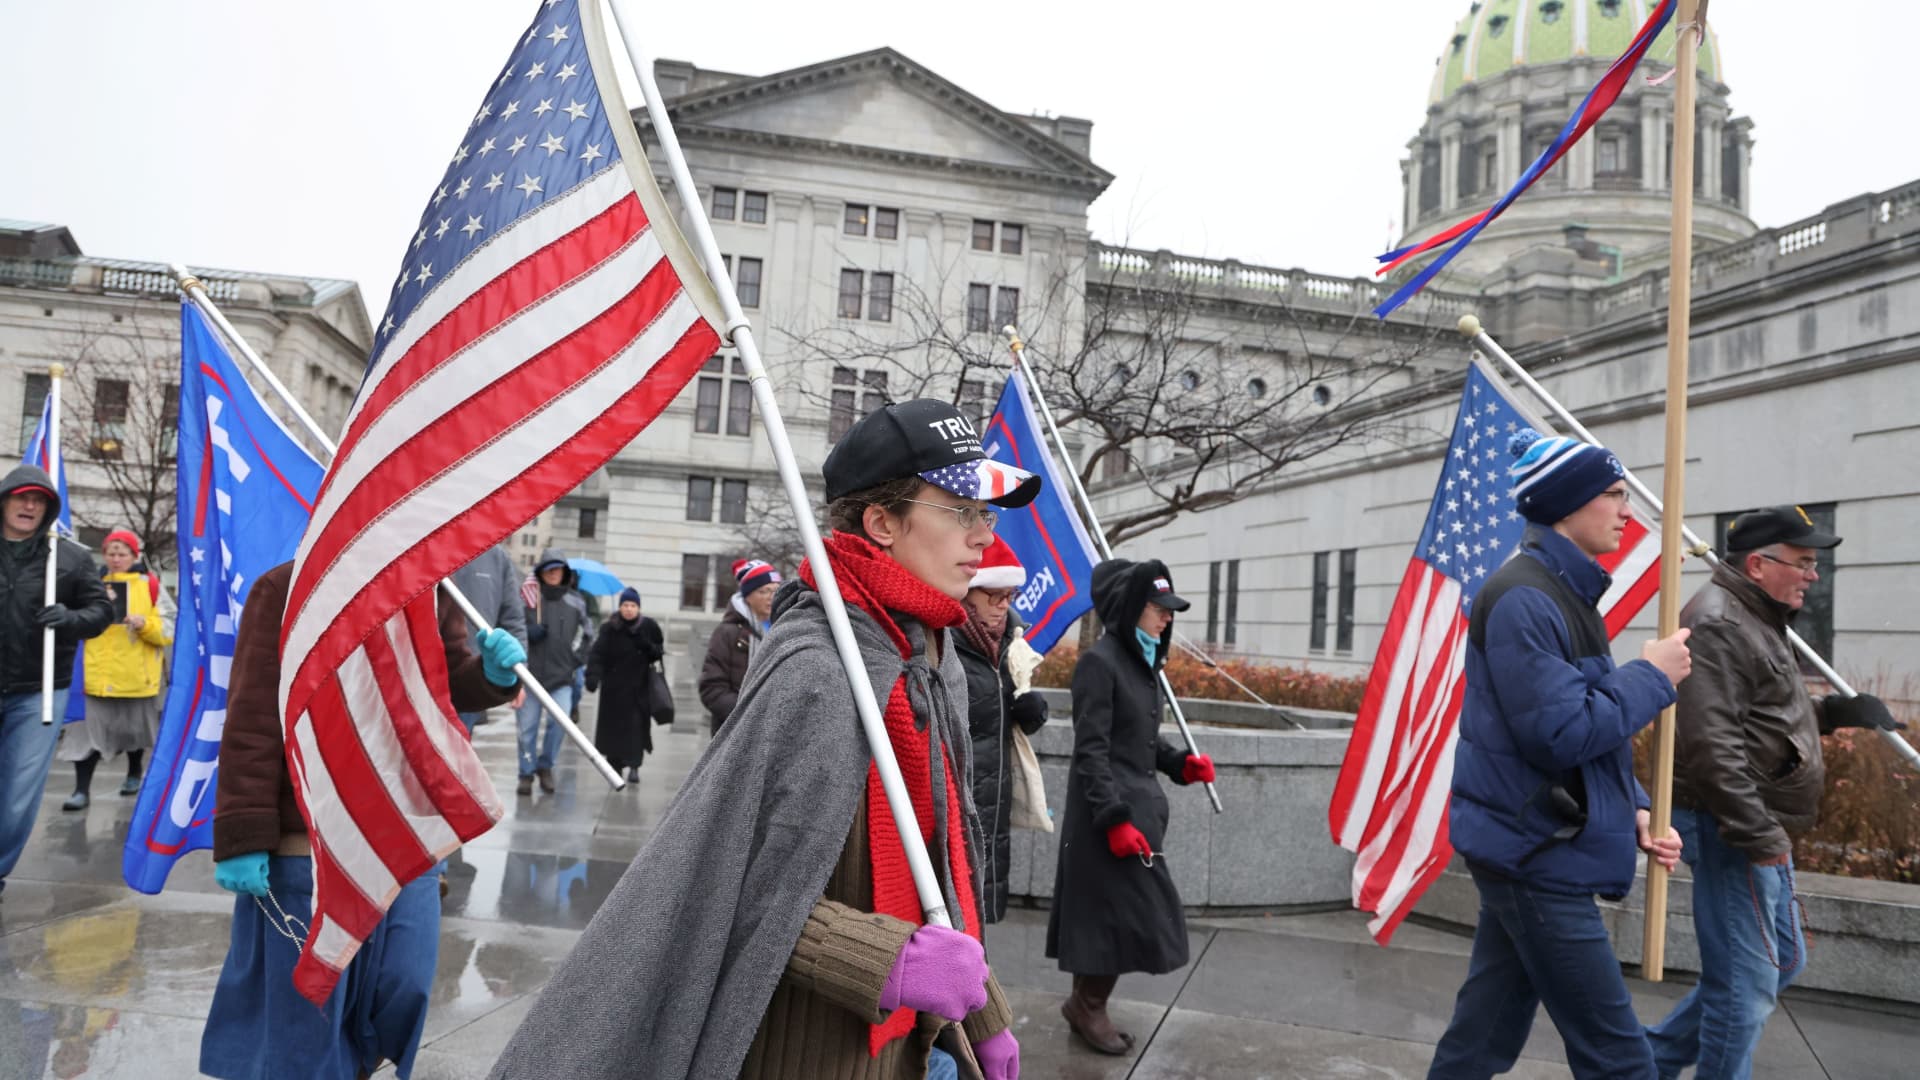 A small band of Trump supporters march with flags as electors gathered to cast their votes for the U.S. presidential election at the State Capitol complex in Harrisburg, Pennsylvania, U.S. December 14, 2020.